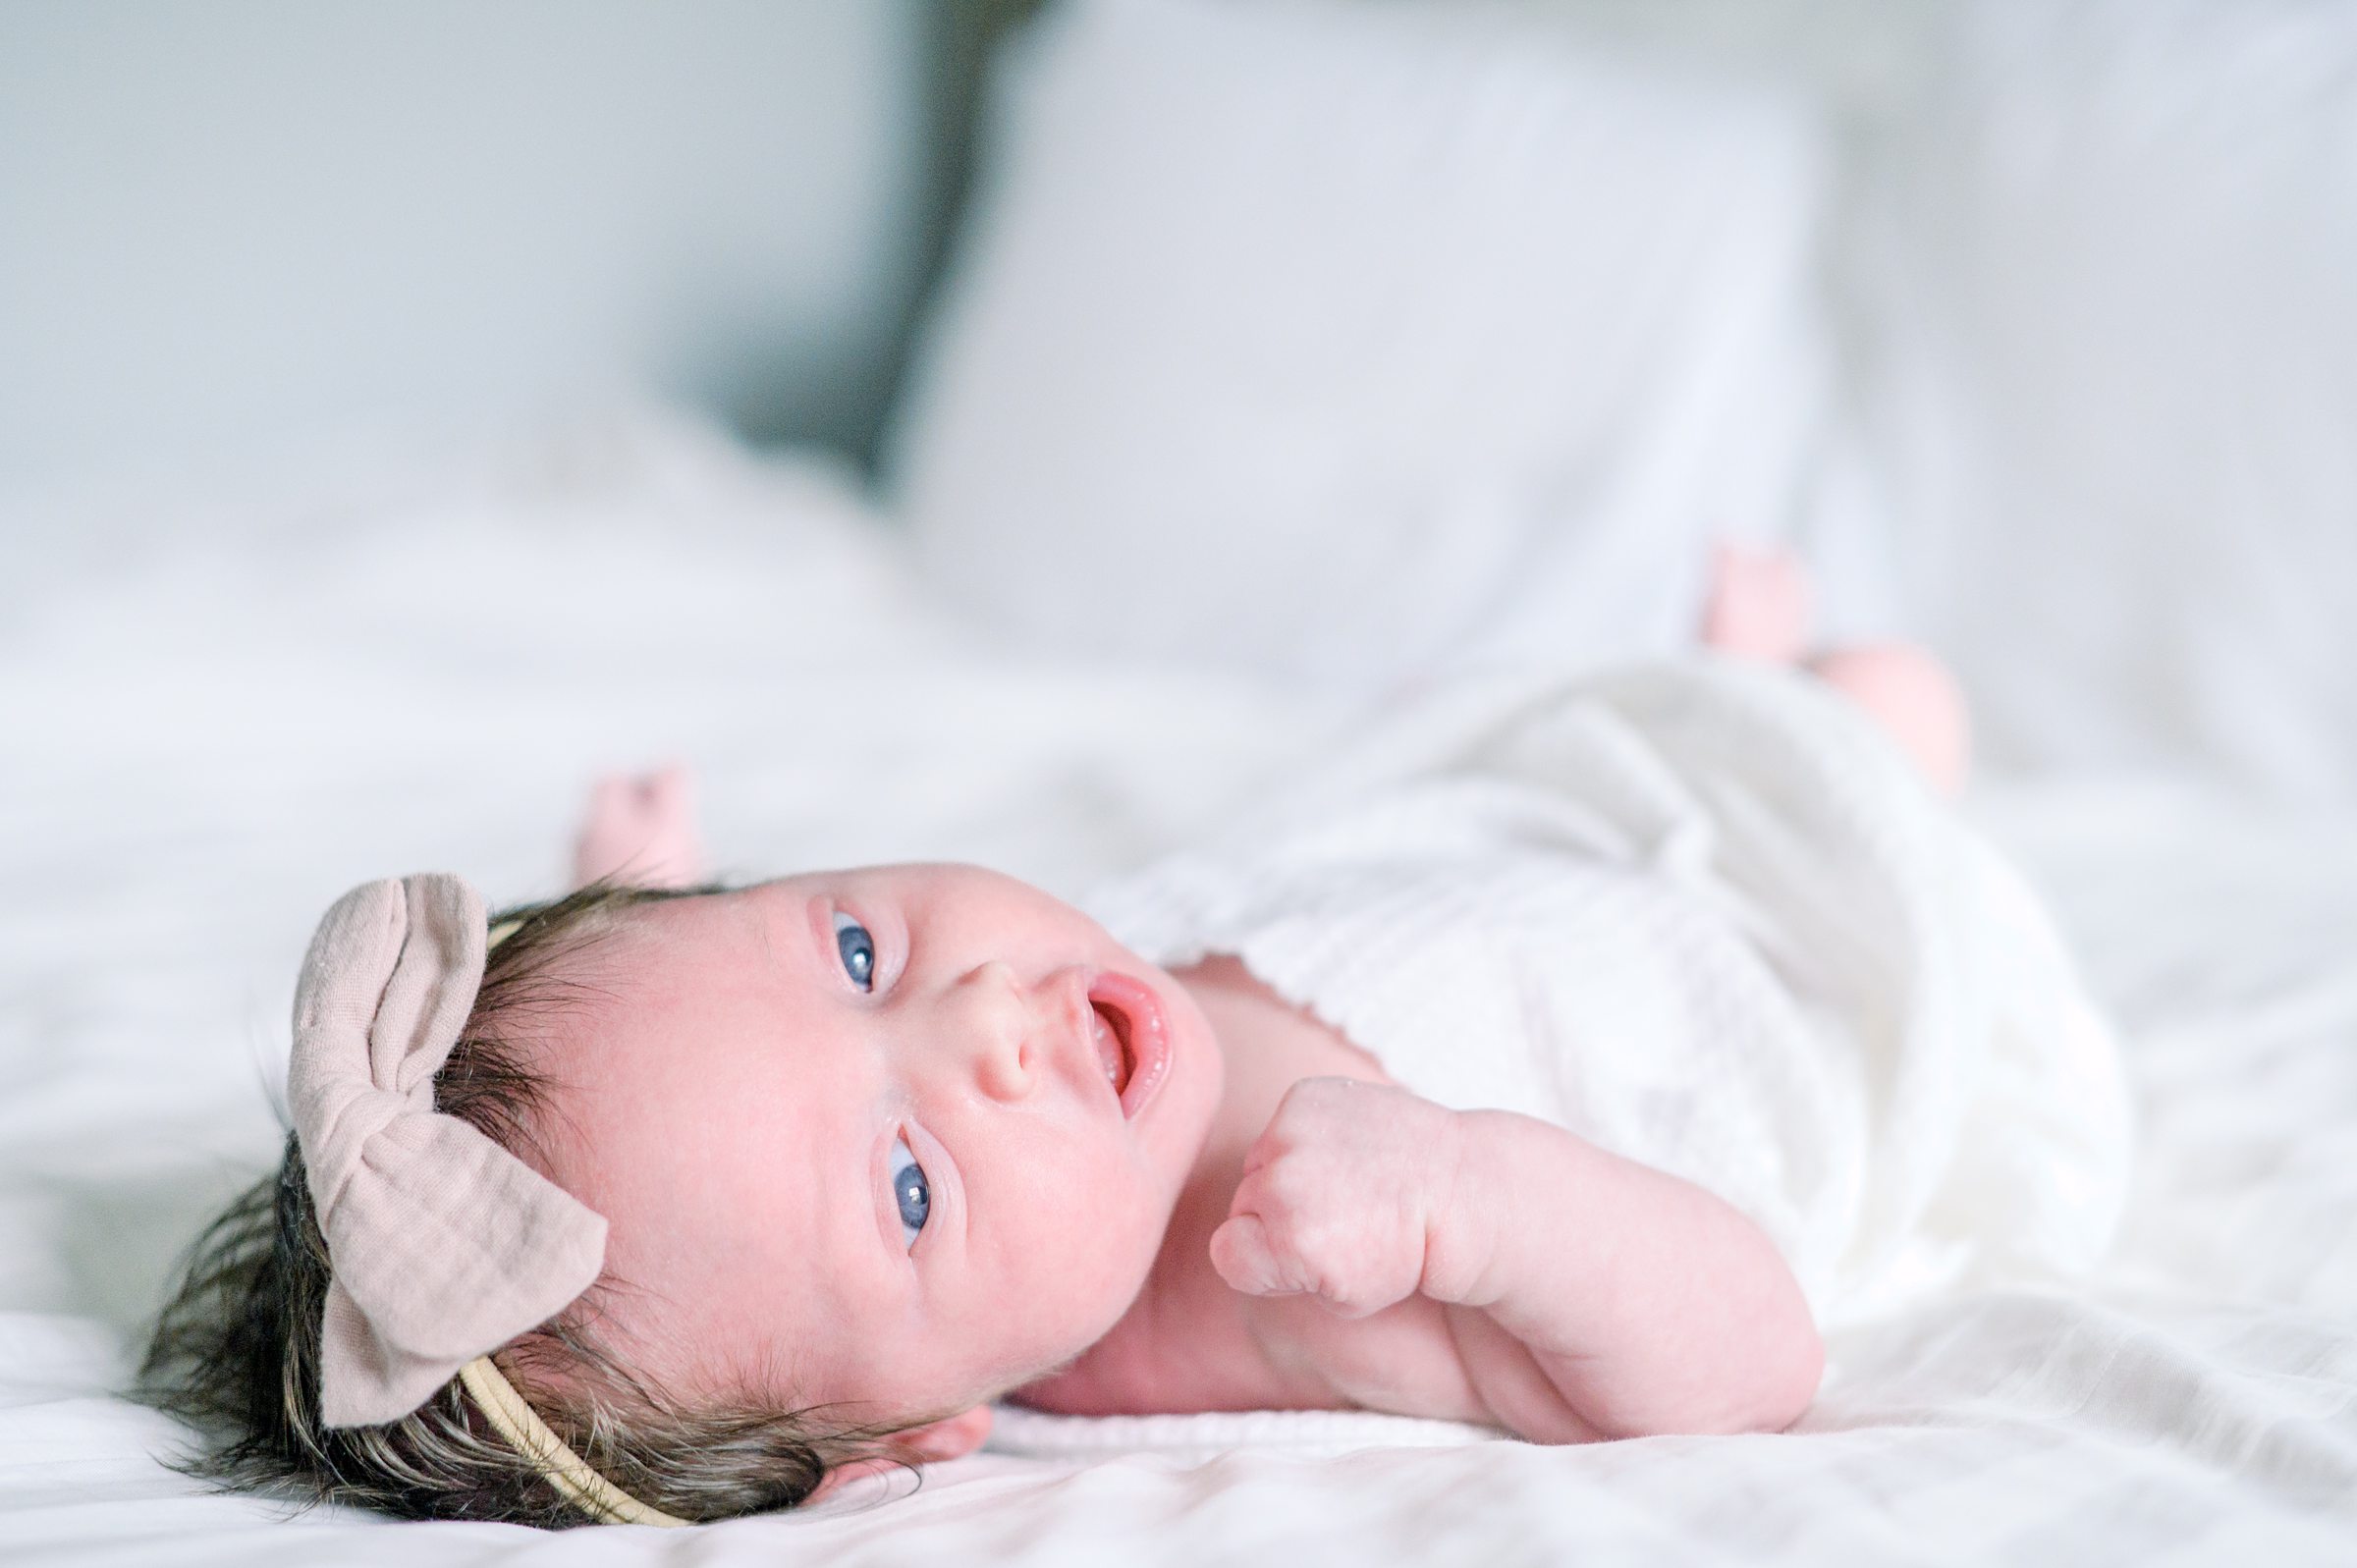 In home newborn photography session photographed by Baltimore Newborn Photographer Cait Kramer